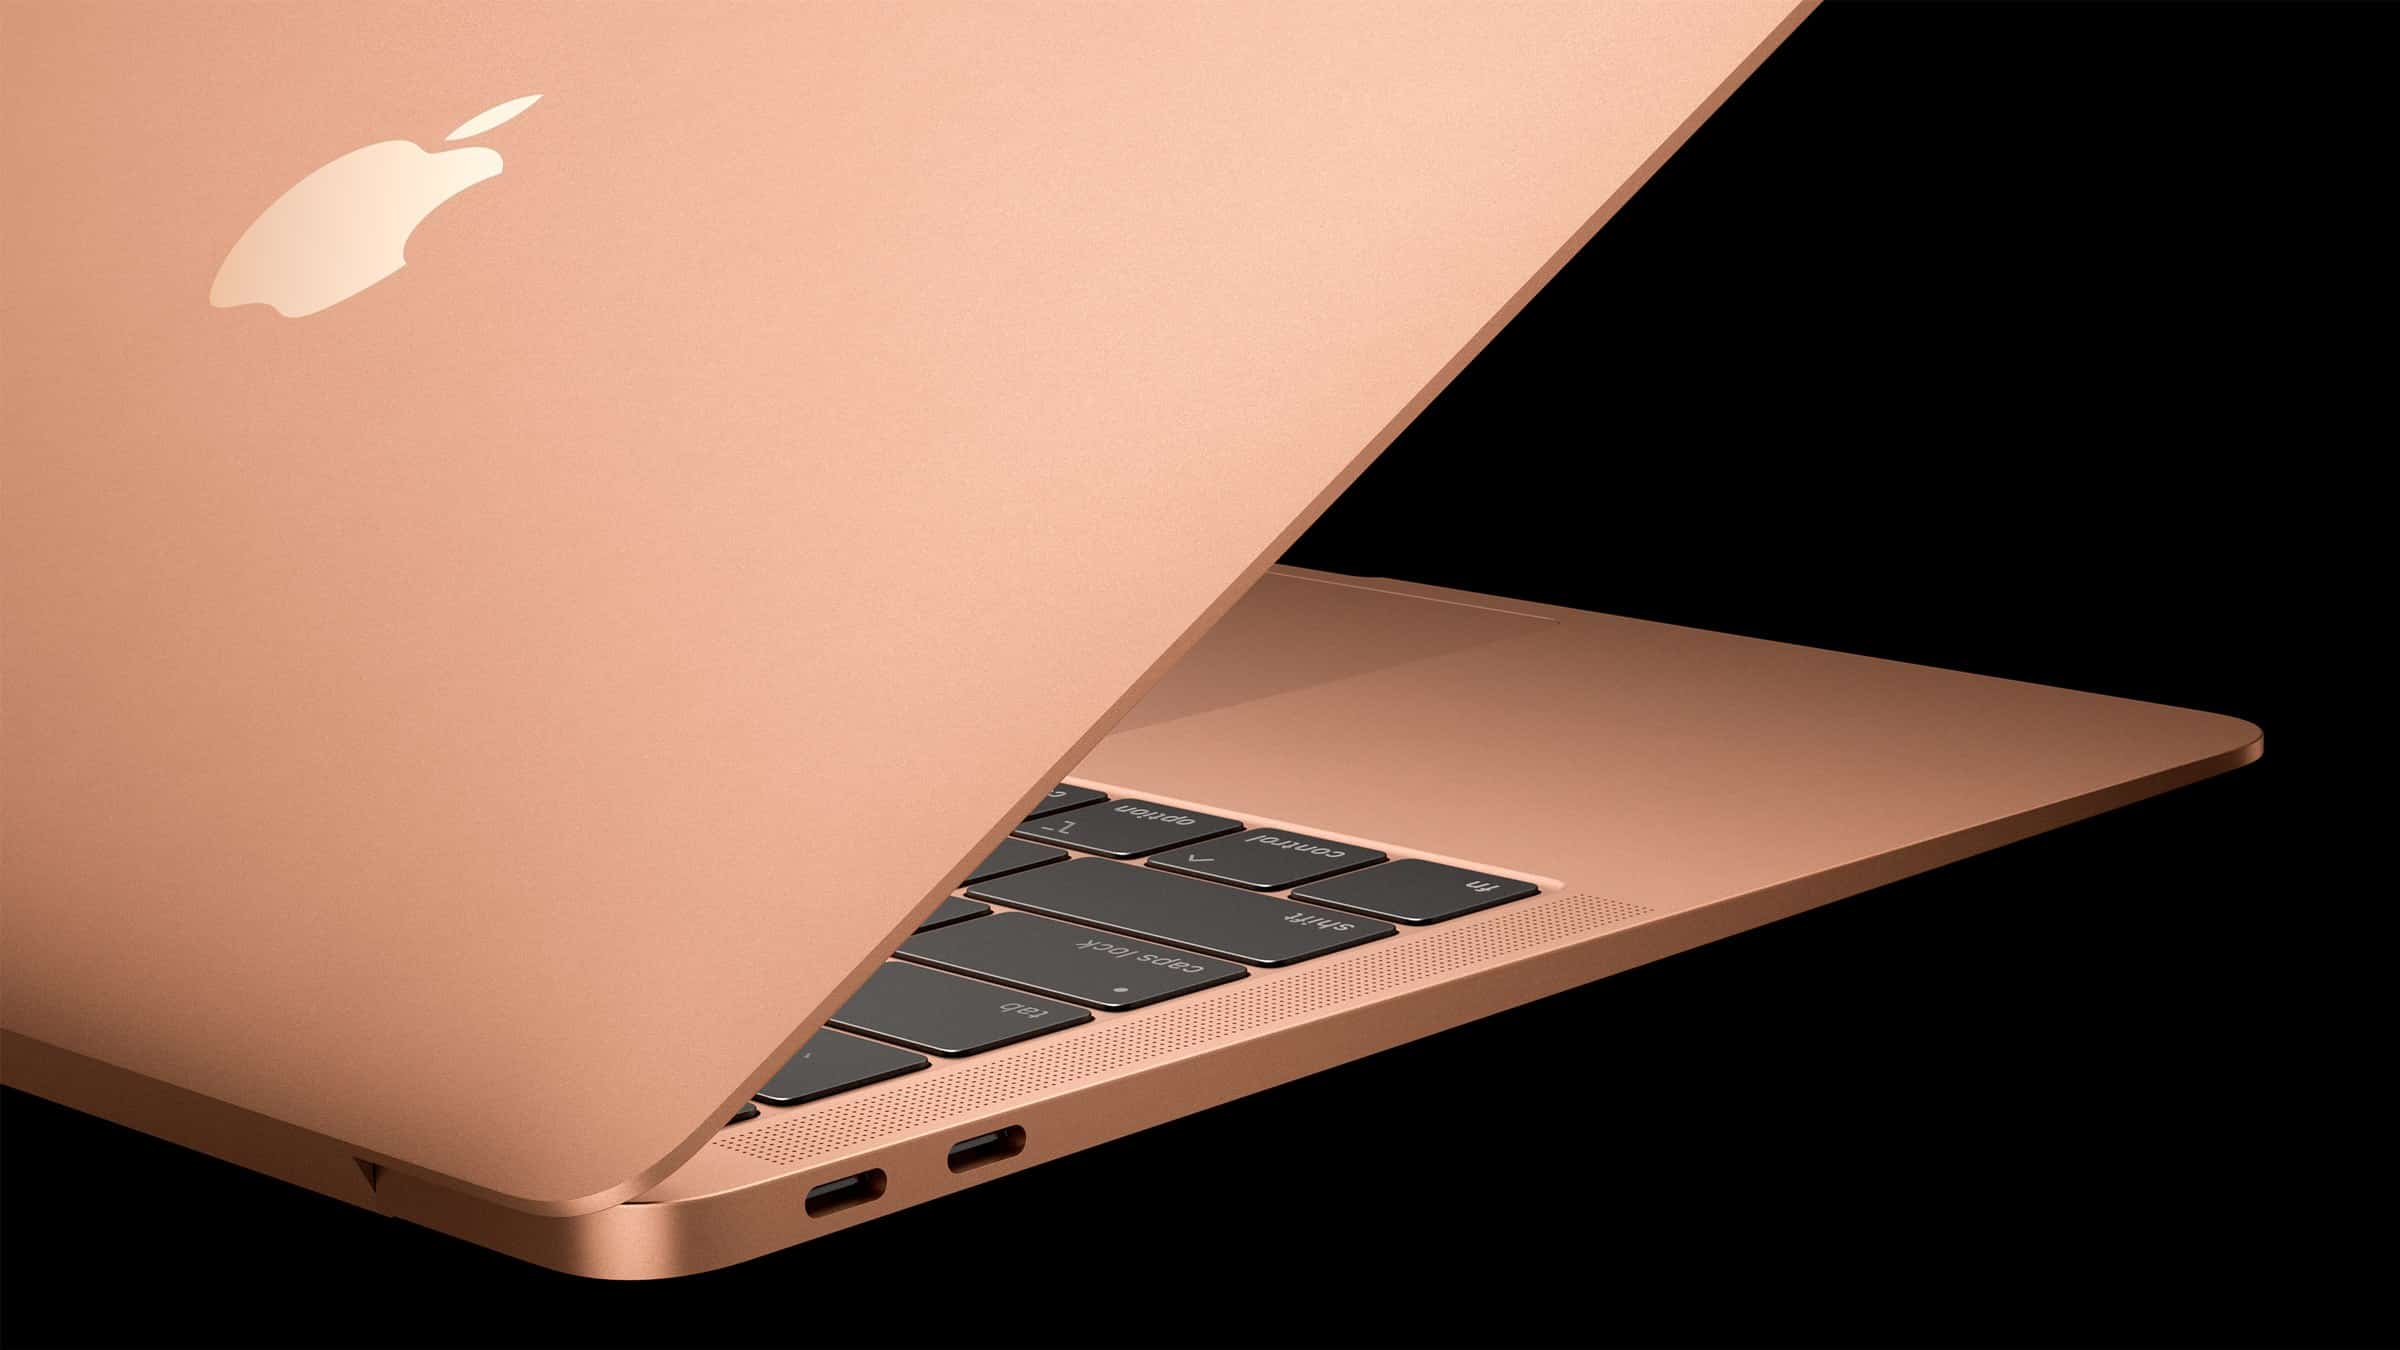 Buy the MacBook Air (256GB) on Amazon for $999